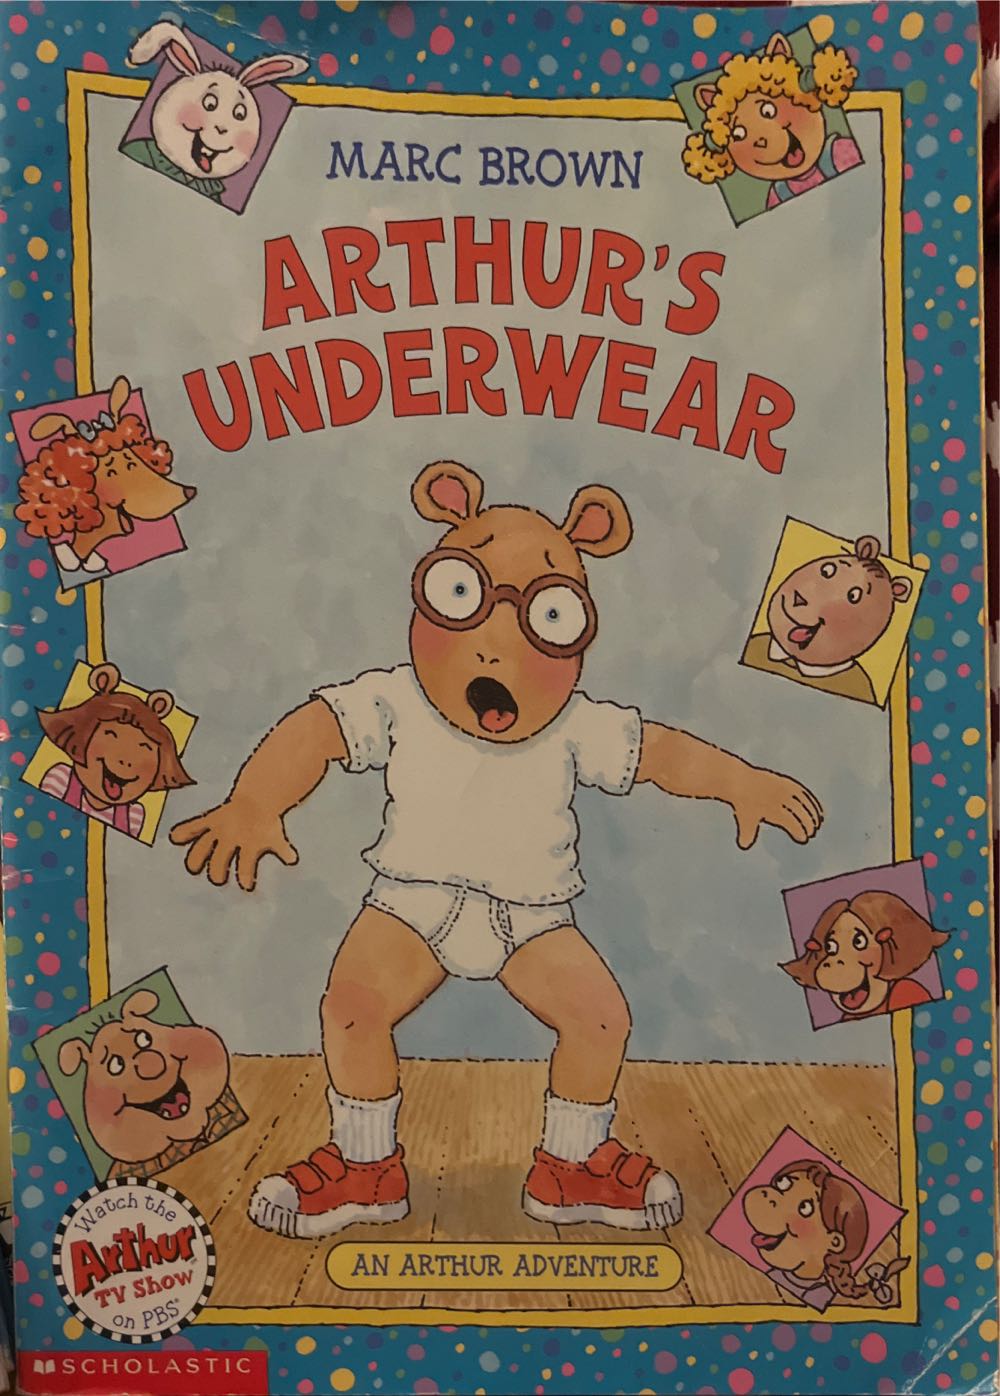 Authur’s Underwear - Marc Brown book collectible - Main Image 1